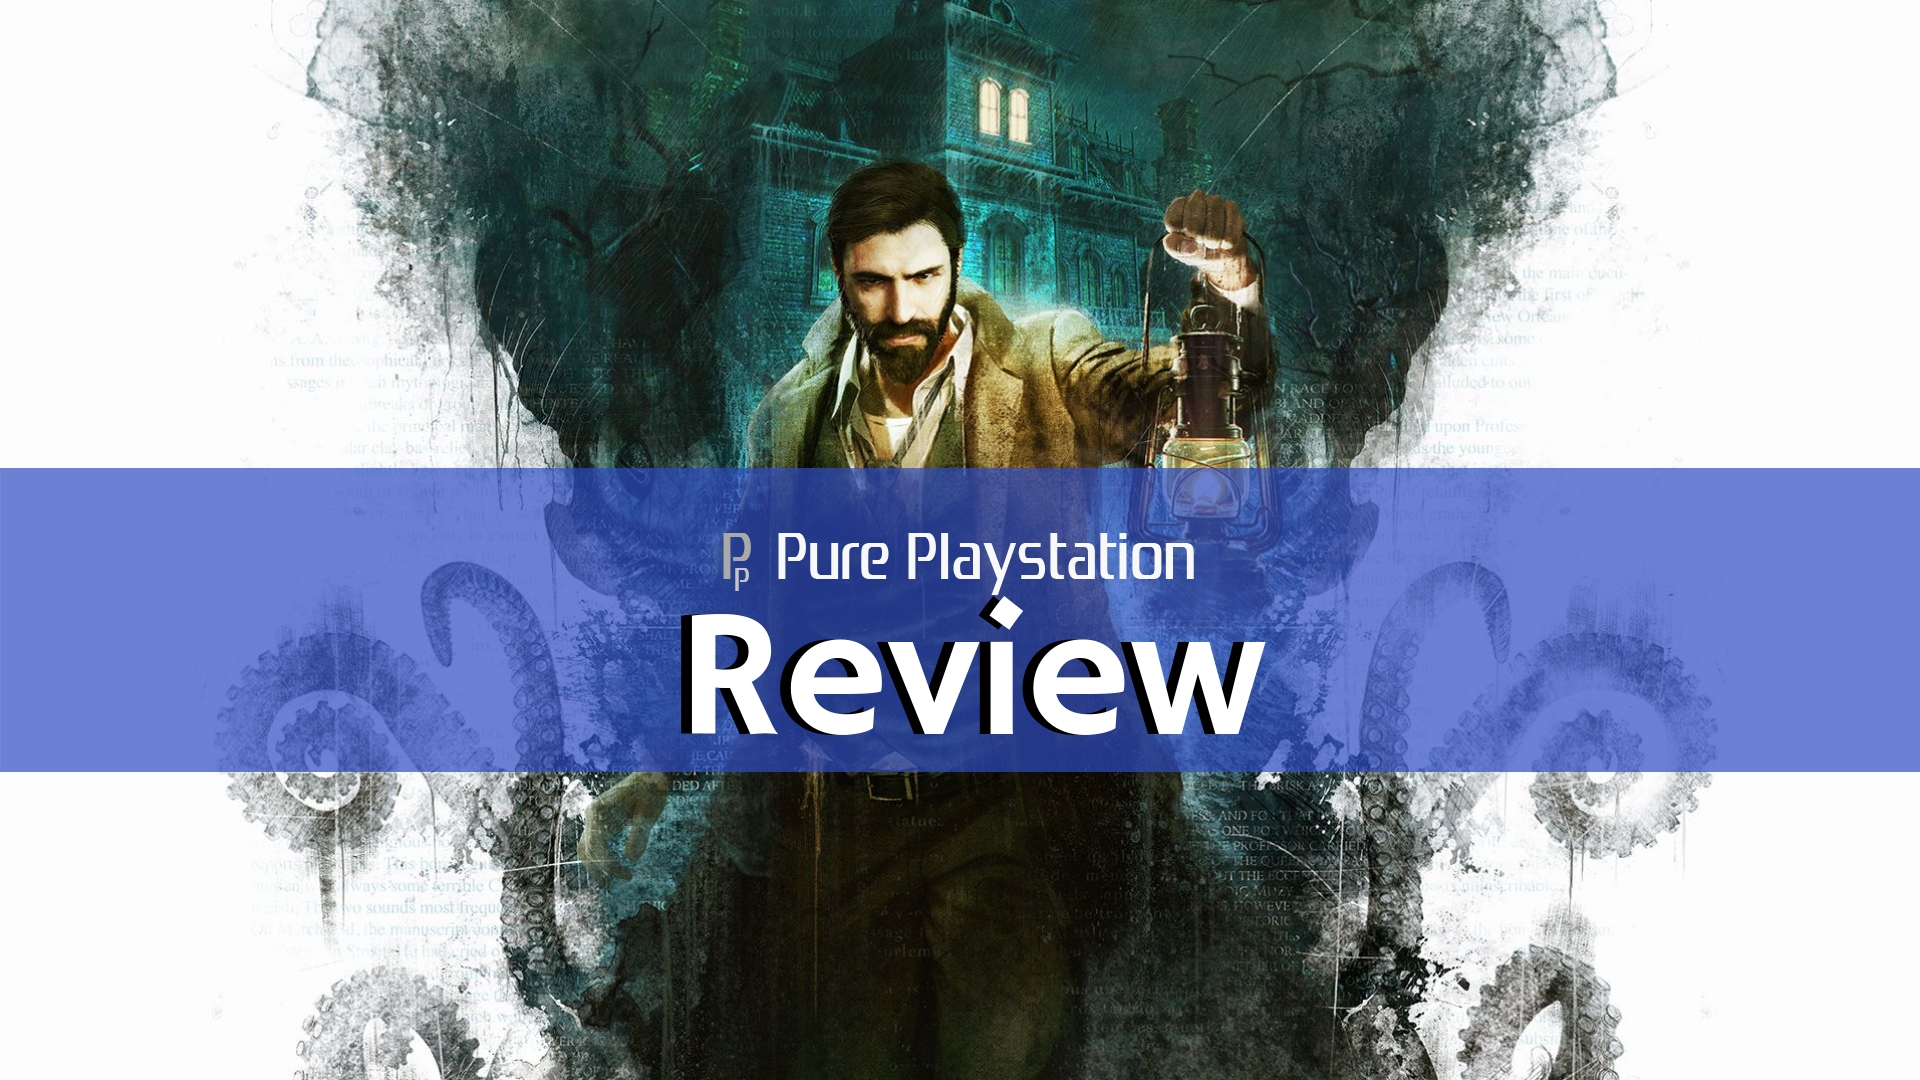 Review: Call of Cthulhu - PS4